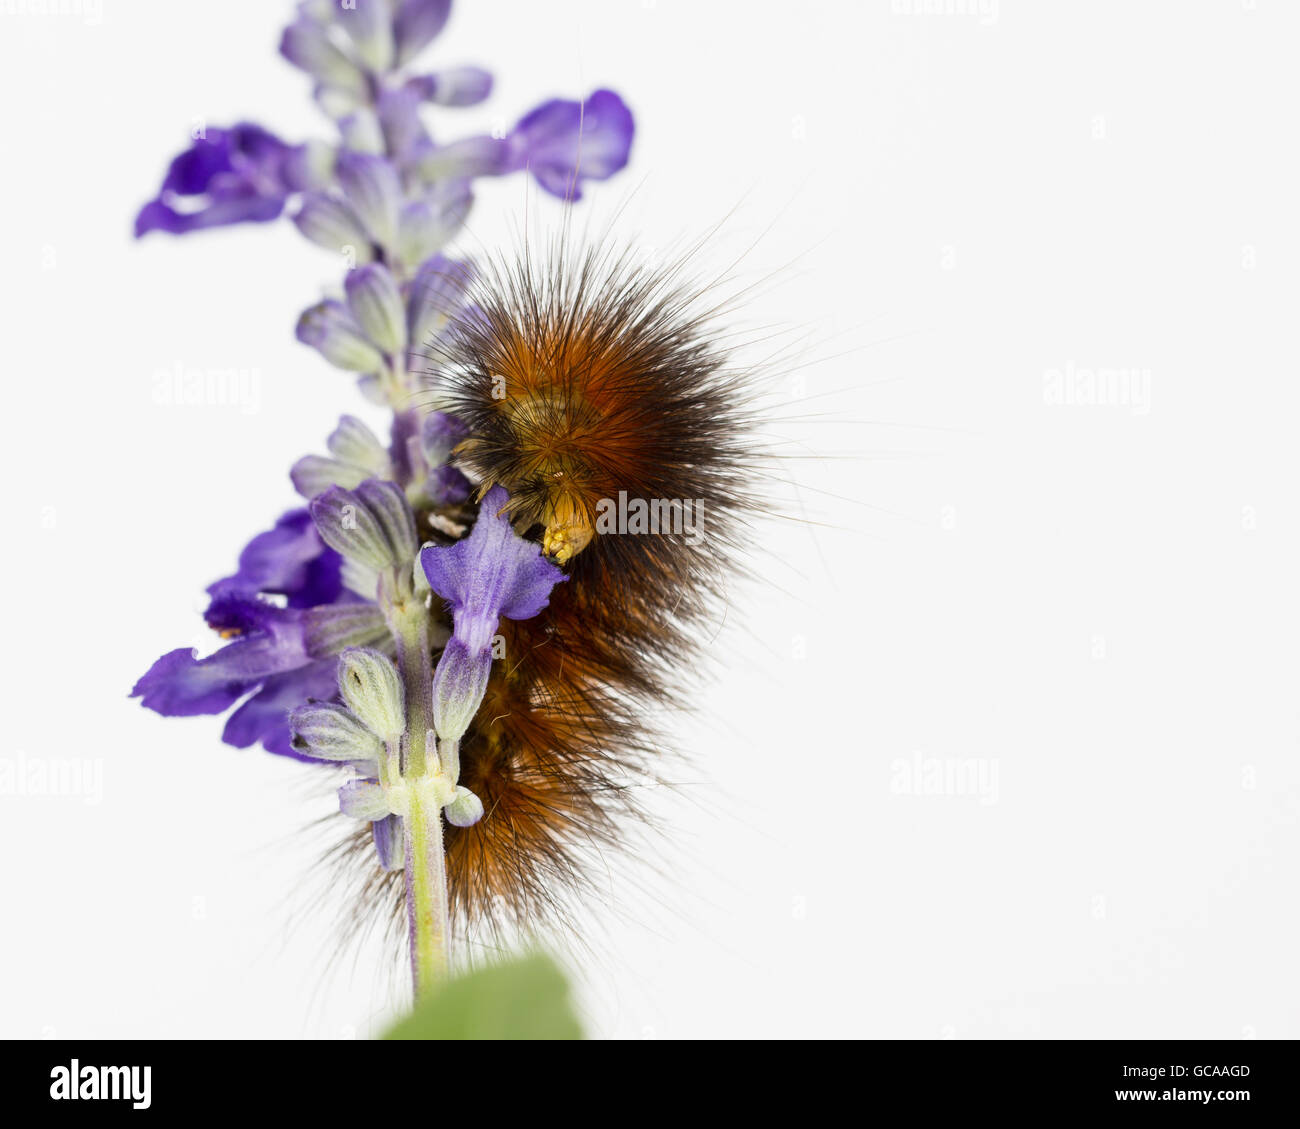 Woolly orange and brown caterpillar eating the flowers of  Salvia farinacea 'Victoria Blue', with white background. Stock Photo